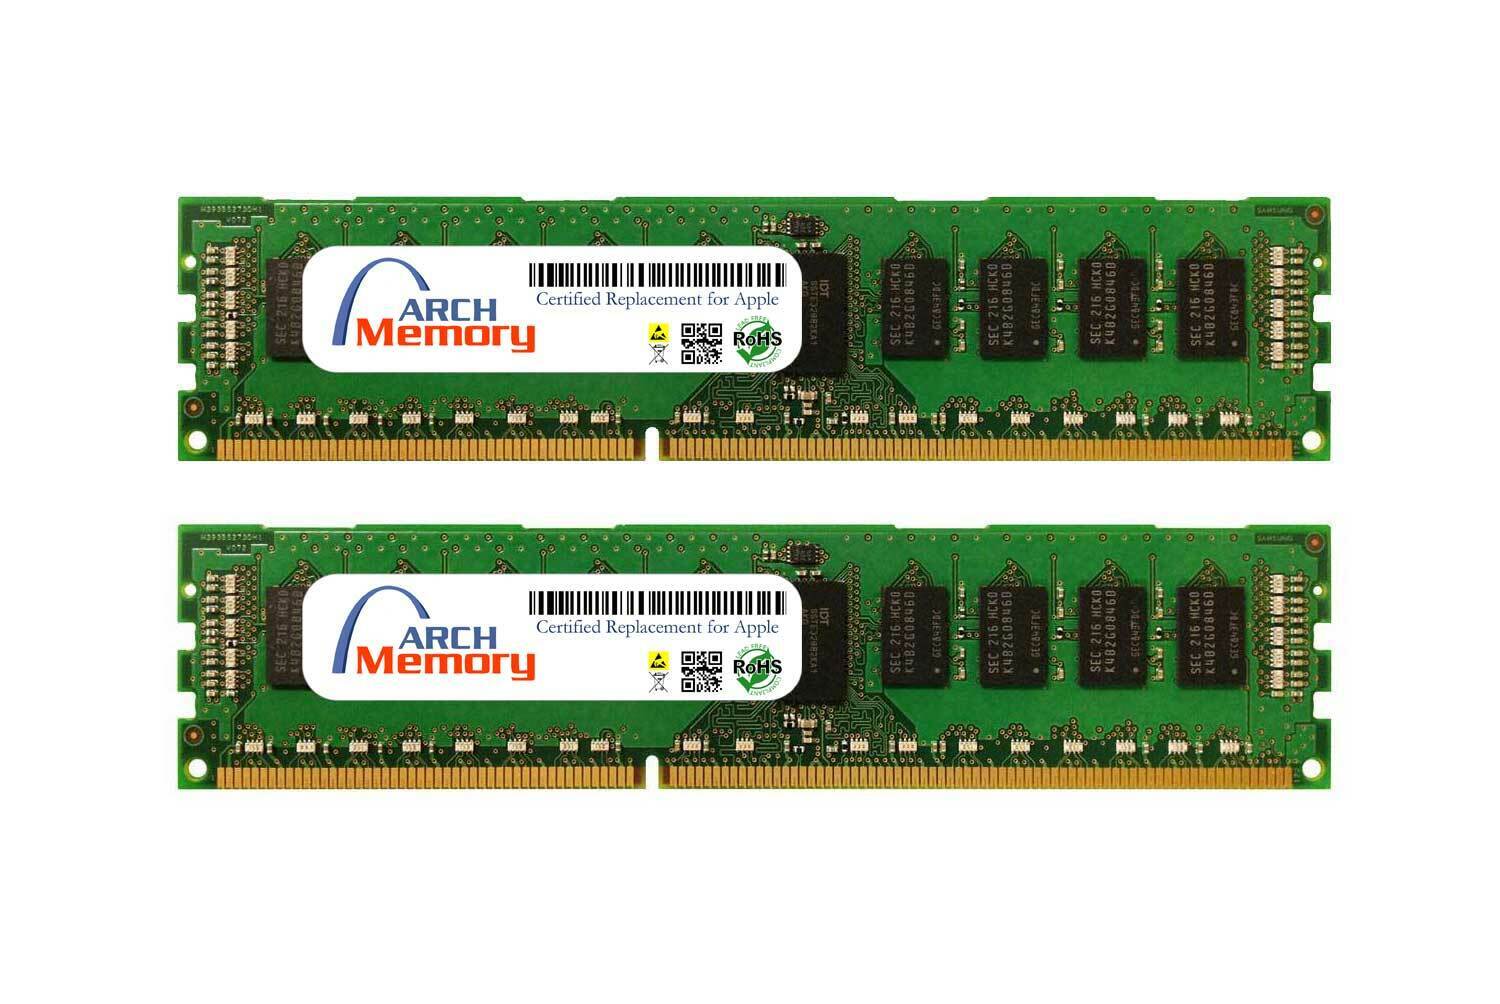 ME253J/A (2x8GB) Certified RAM for Apple Mac Pro Quad-core 3.7GHz Late 2013-2016